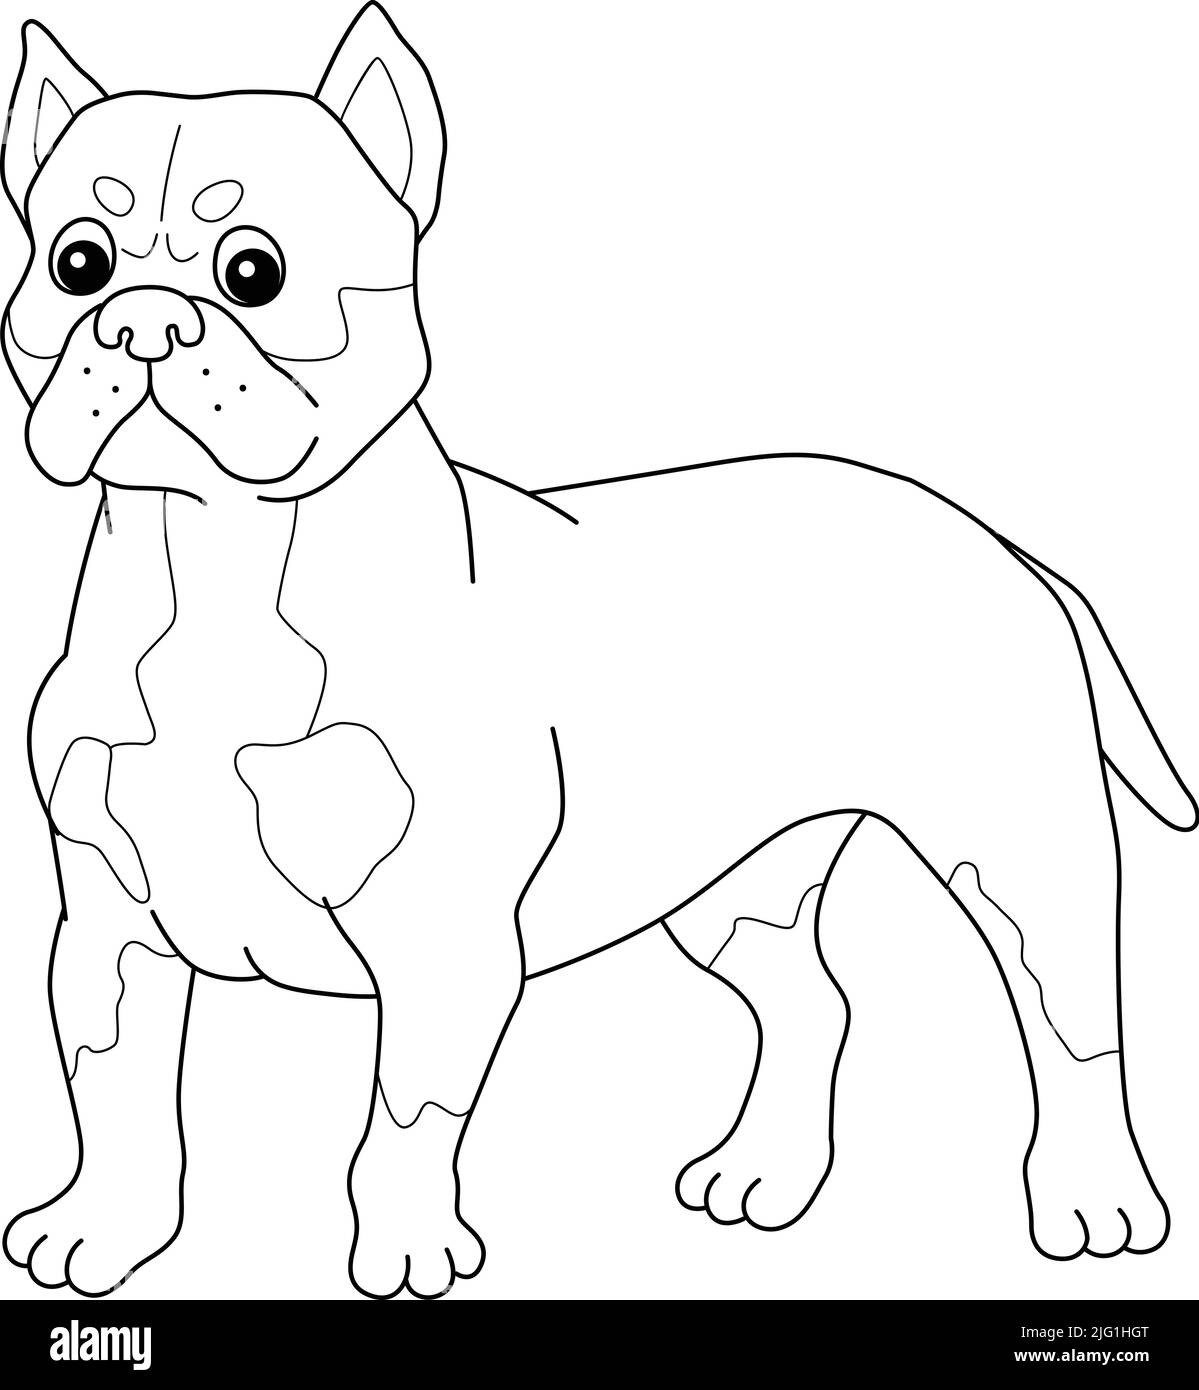 American Bully Dog Isolated Coloring Page Stock Vector Image & Art - Alamy